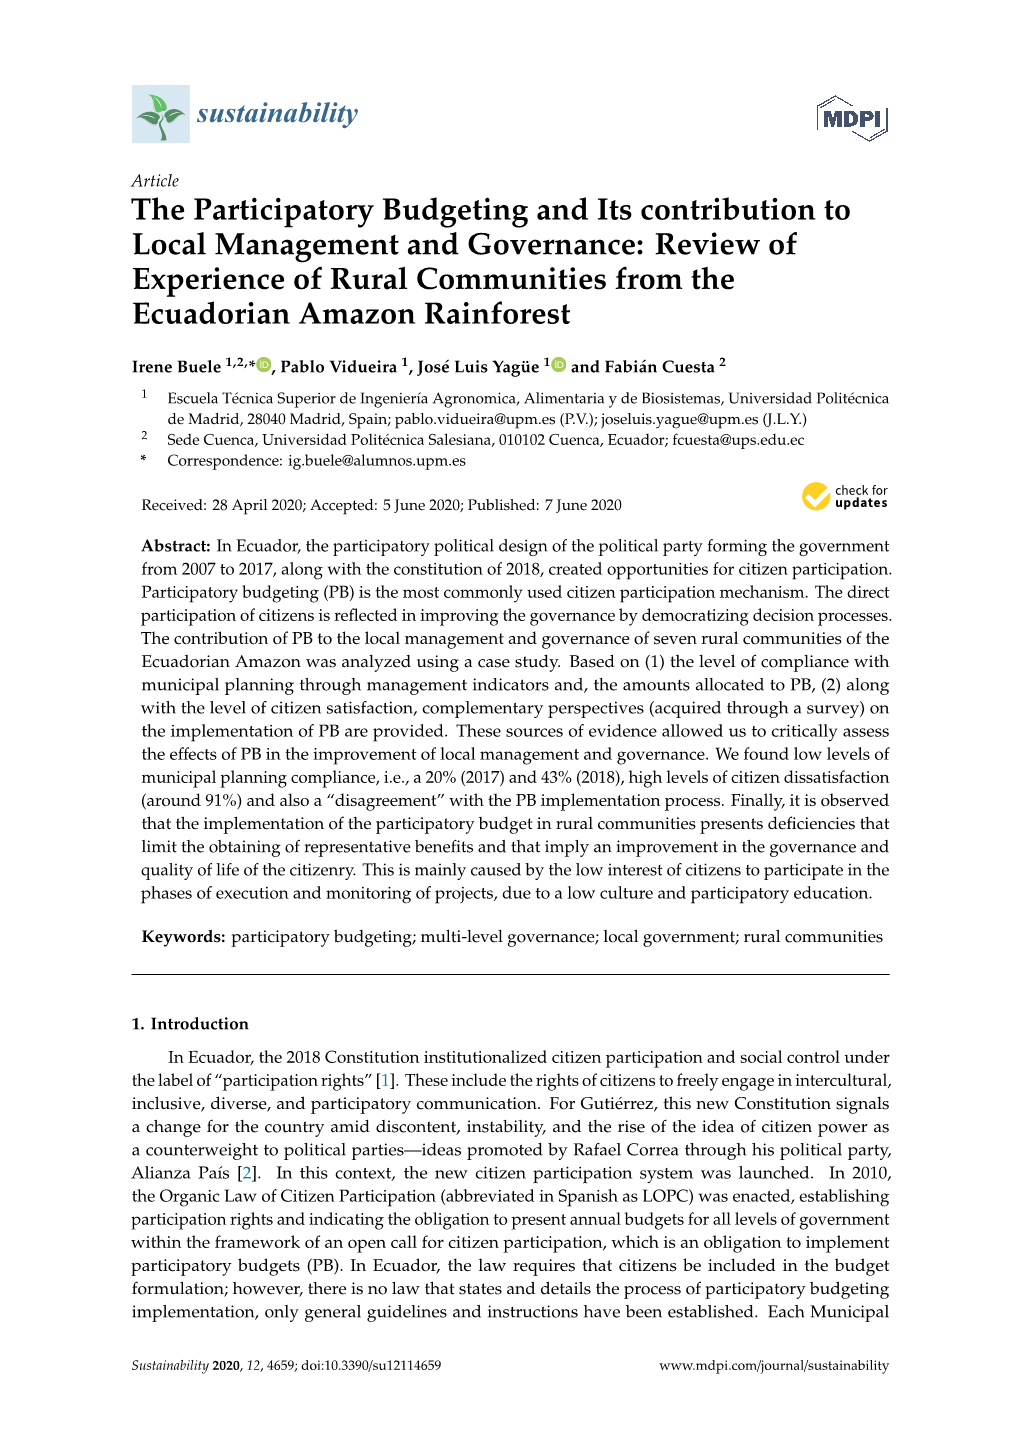 The Participatory Budgeting and Its Contribution to Local Management and Governance: Review of Experience of Rural Communities from the Ecuadorian Amazon Rainforest